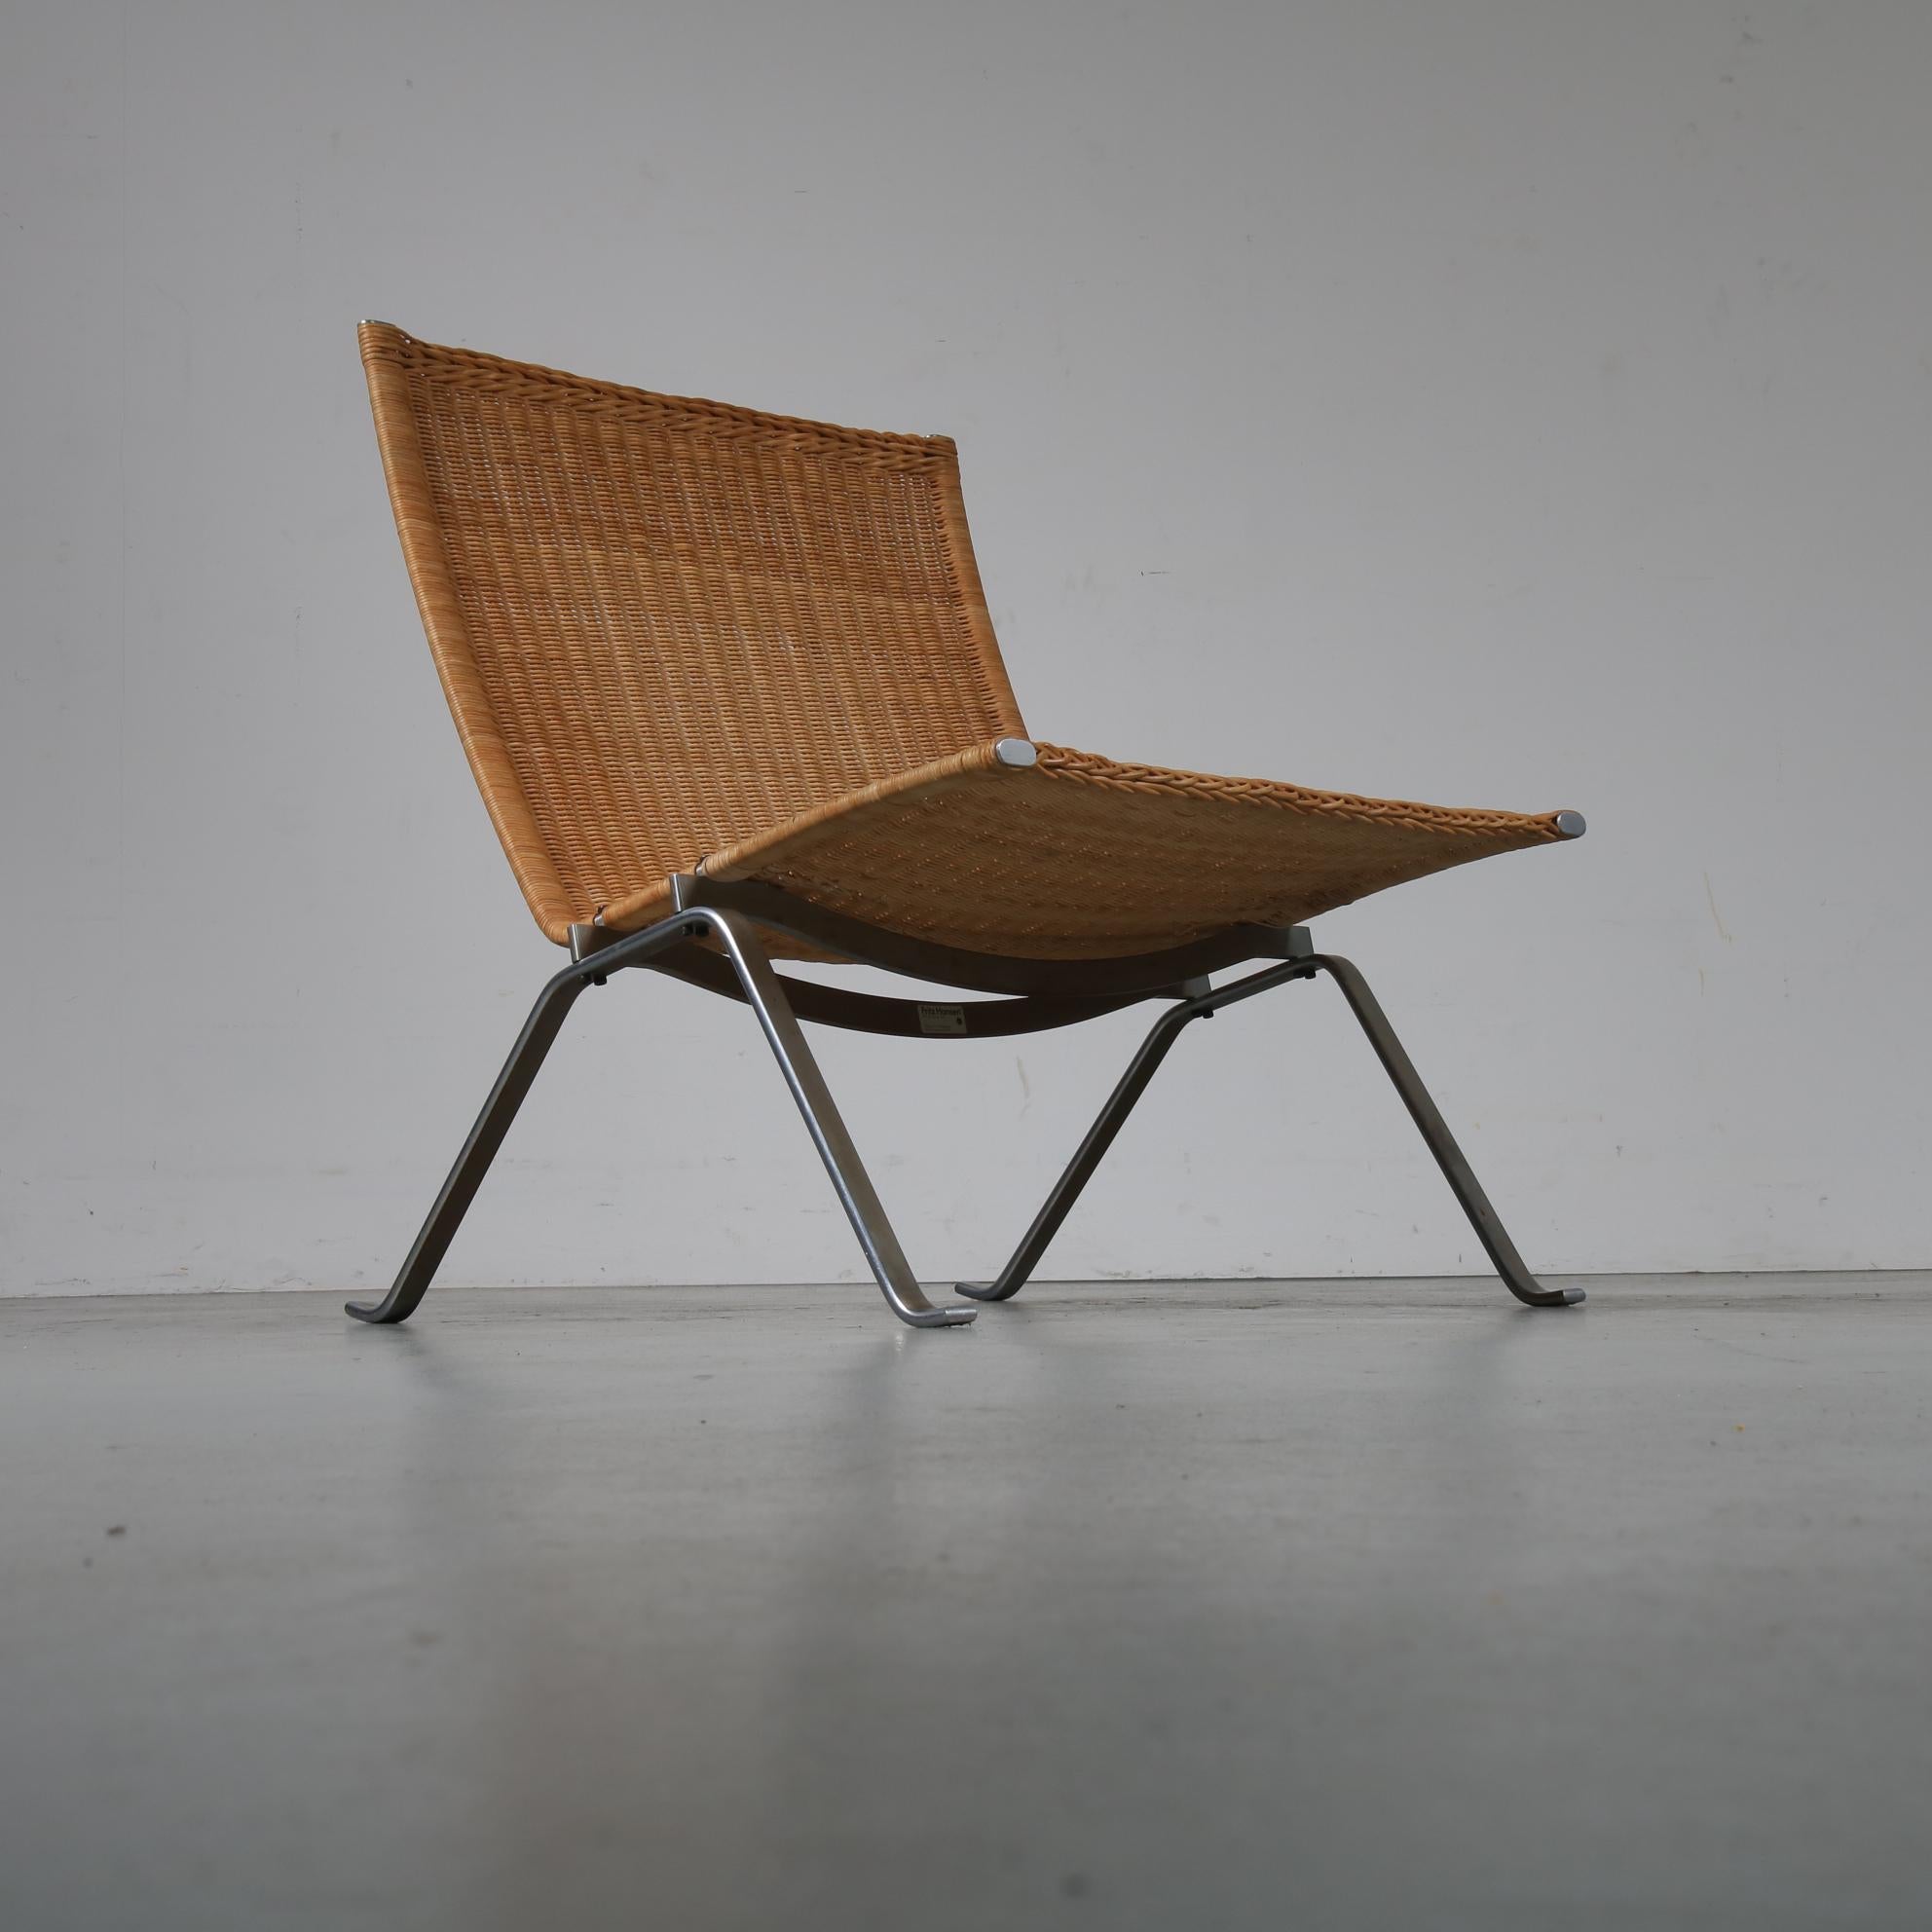 A stunning PK22 lounge chair, designed by Poul Kjaerholm, manufactured by Fritz Hansen in Denmark, circa 1960.

The chair has a beautiful chrome-plated metal base. The seat is made of high quality wicker, creating a very nice contrast with the